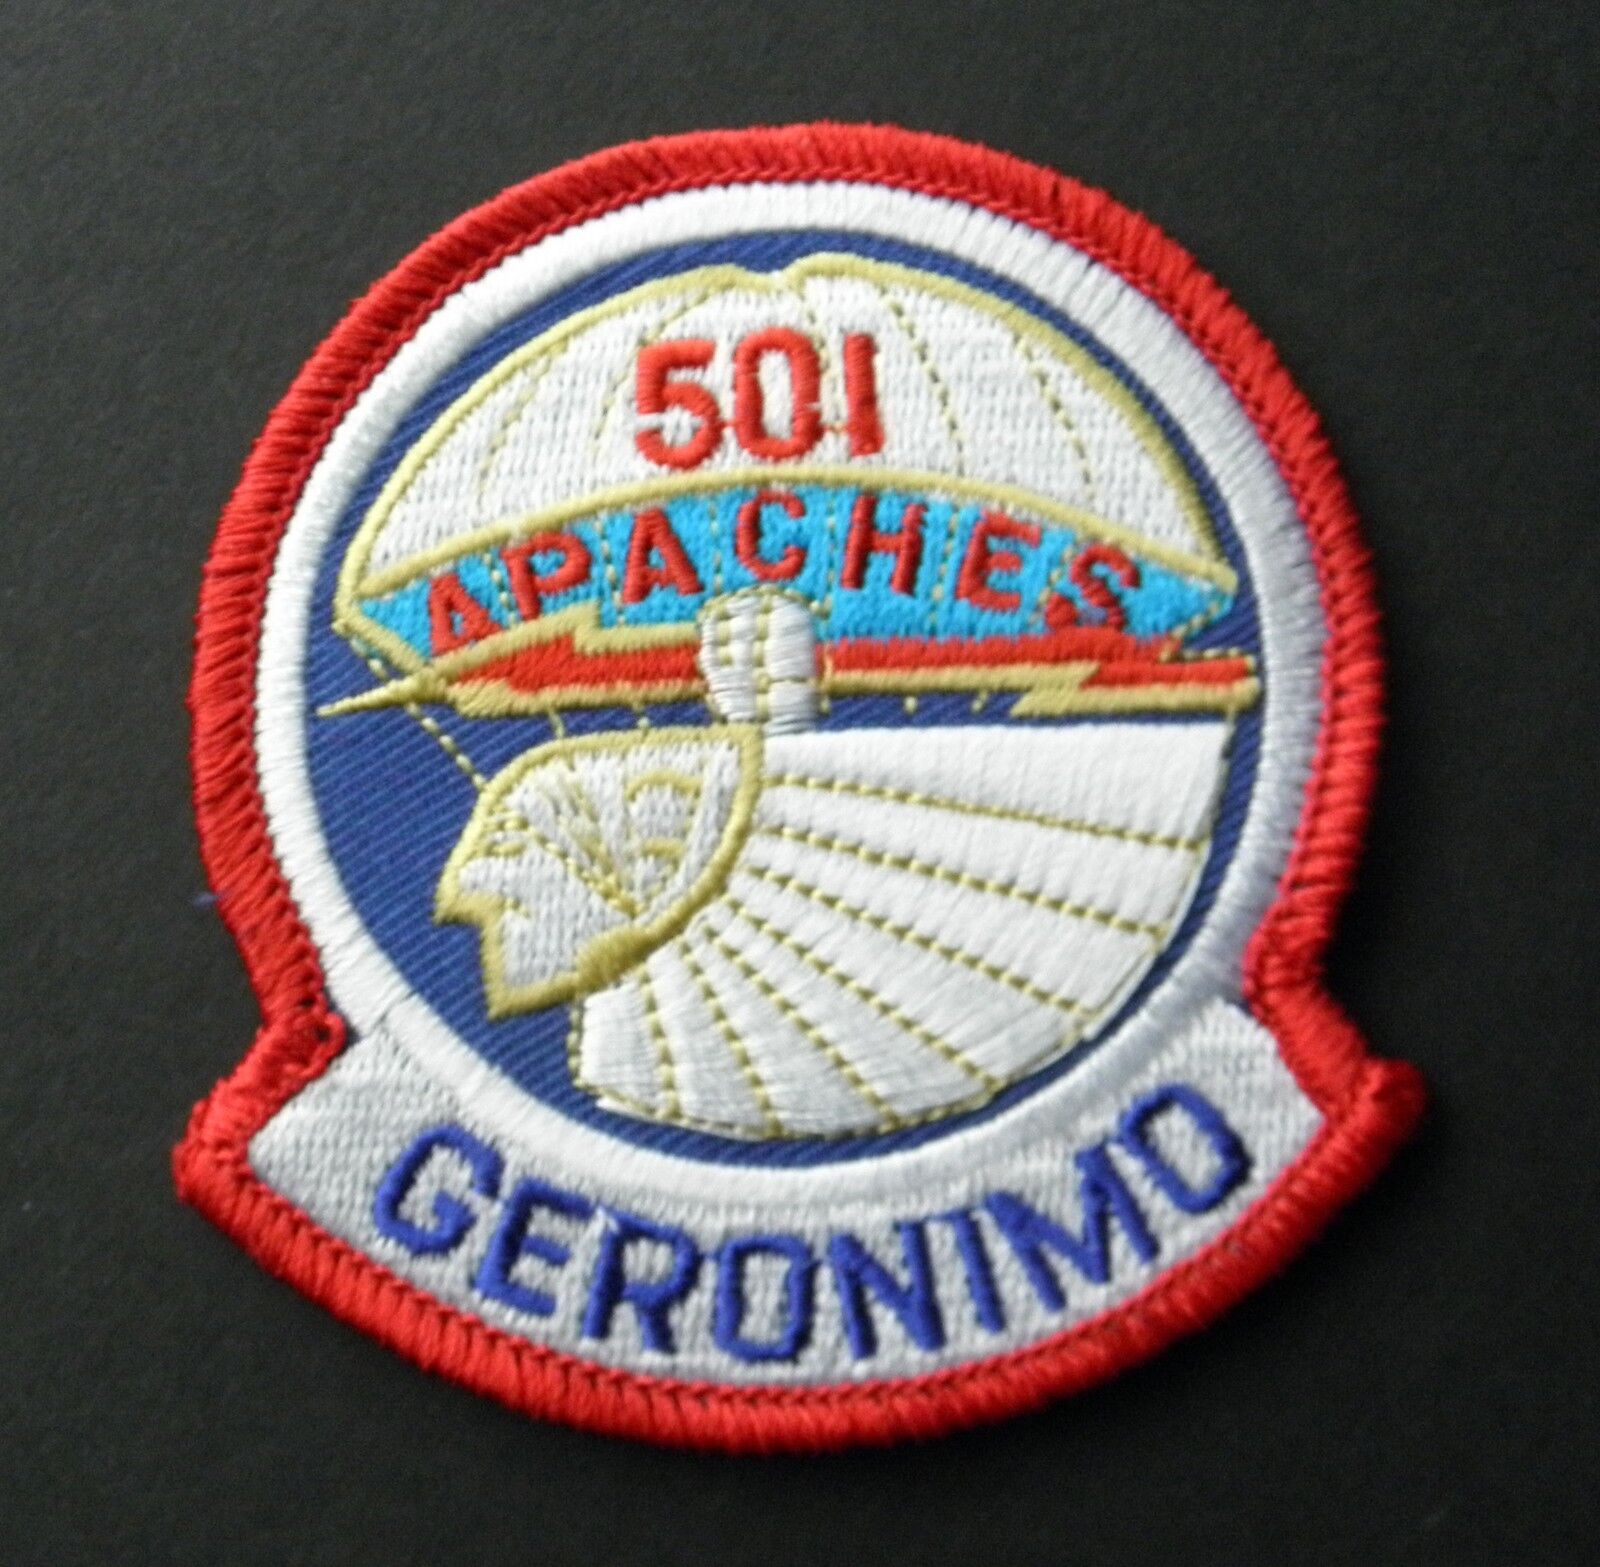 501ST PARACHUTE INFANTRY REGIMENT APACHES GERONIMO EMBROIDERED PATCH 3 INCHES